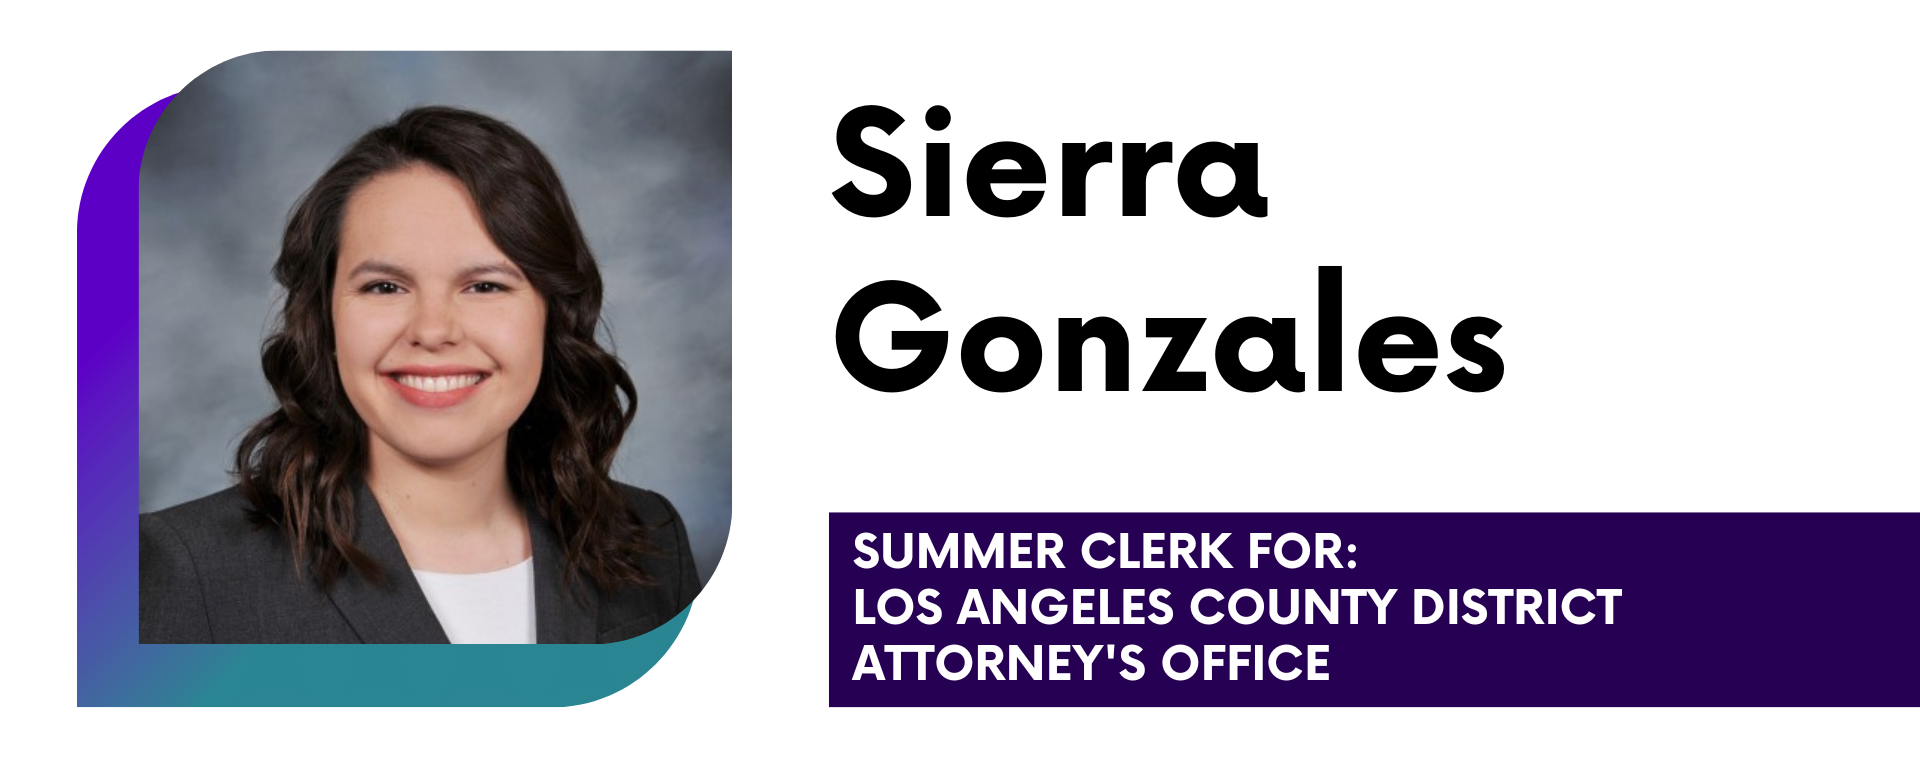 Sierra Gonzales Summer Clerk for: Los Angeles County District Attorney's Office